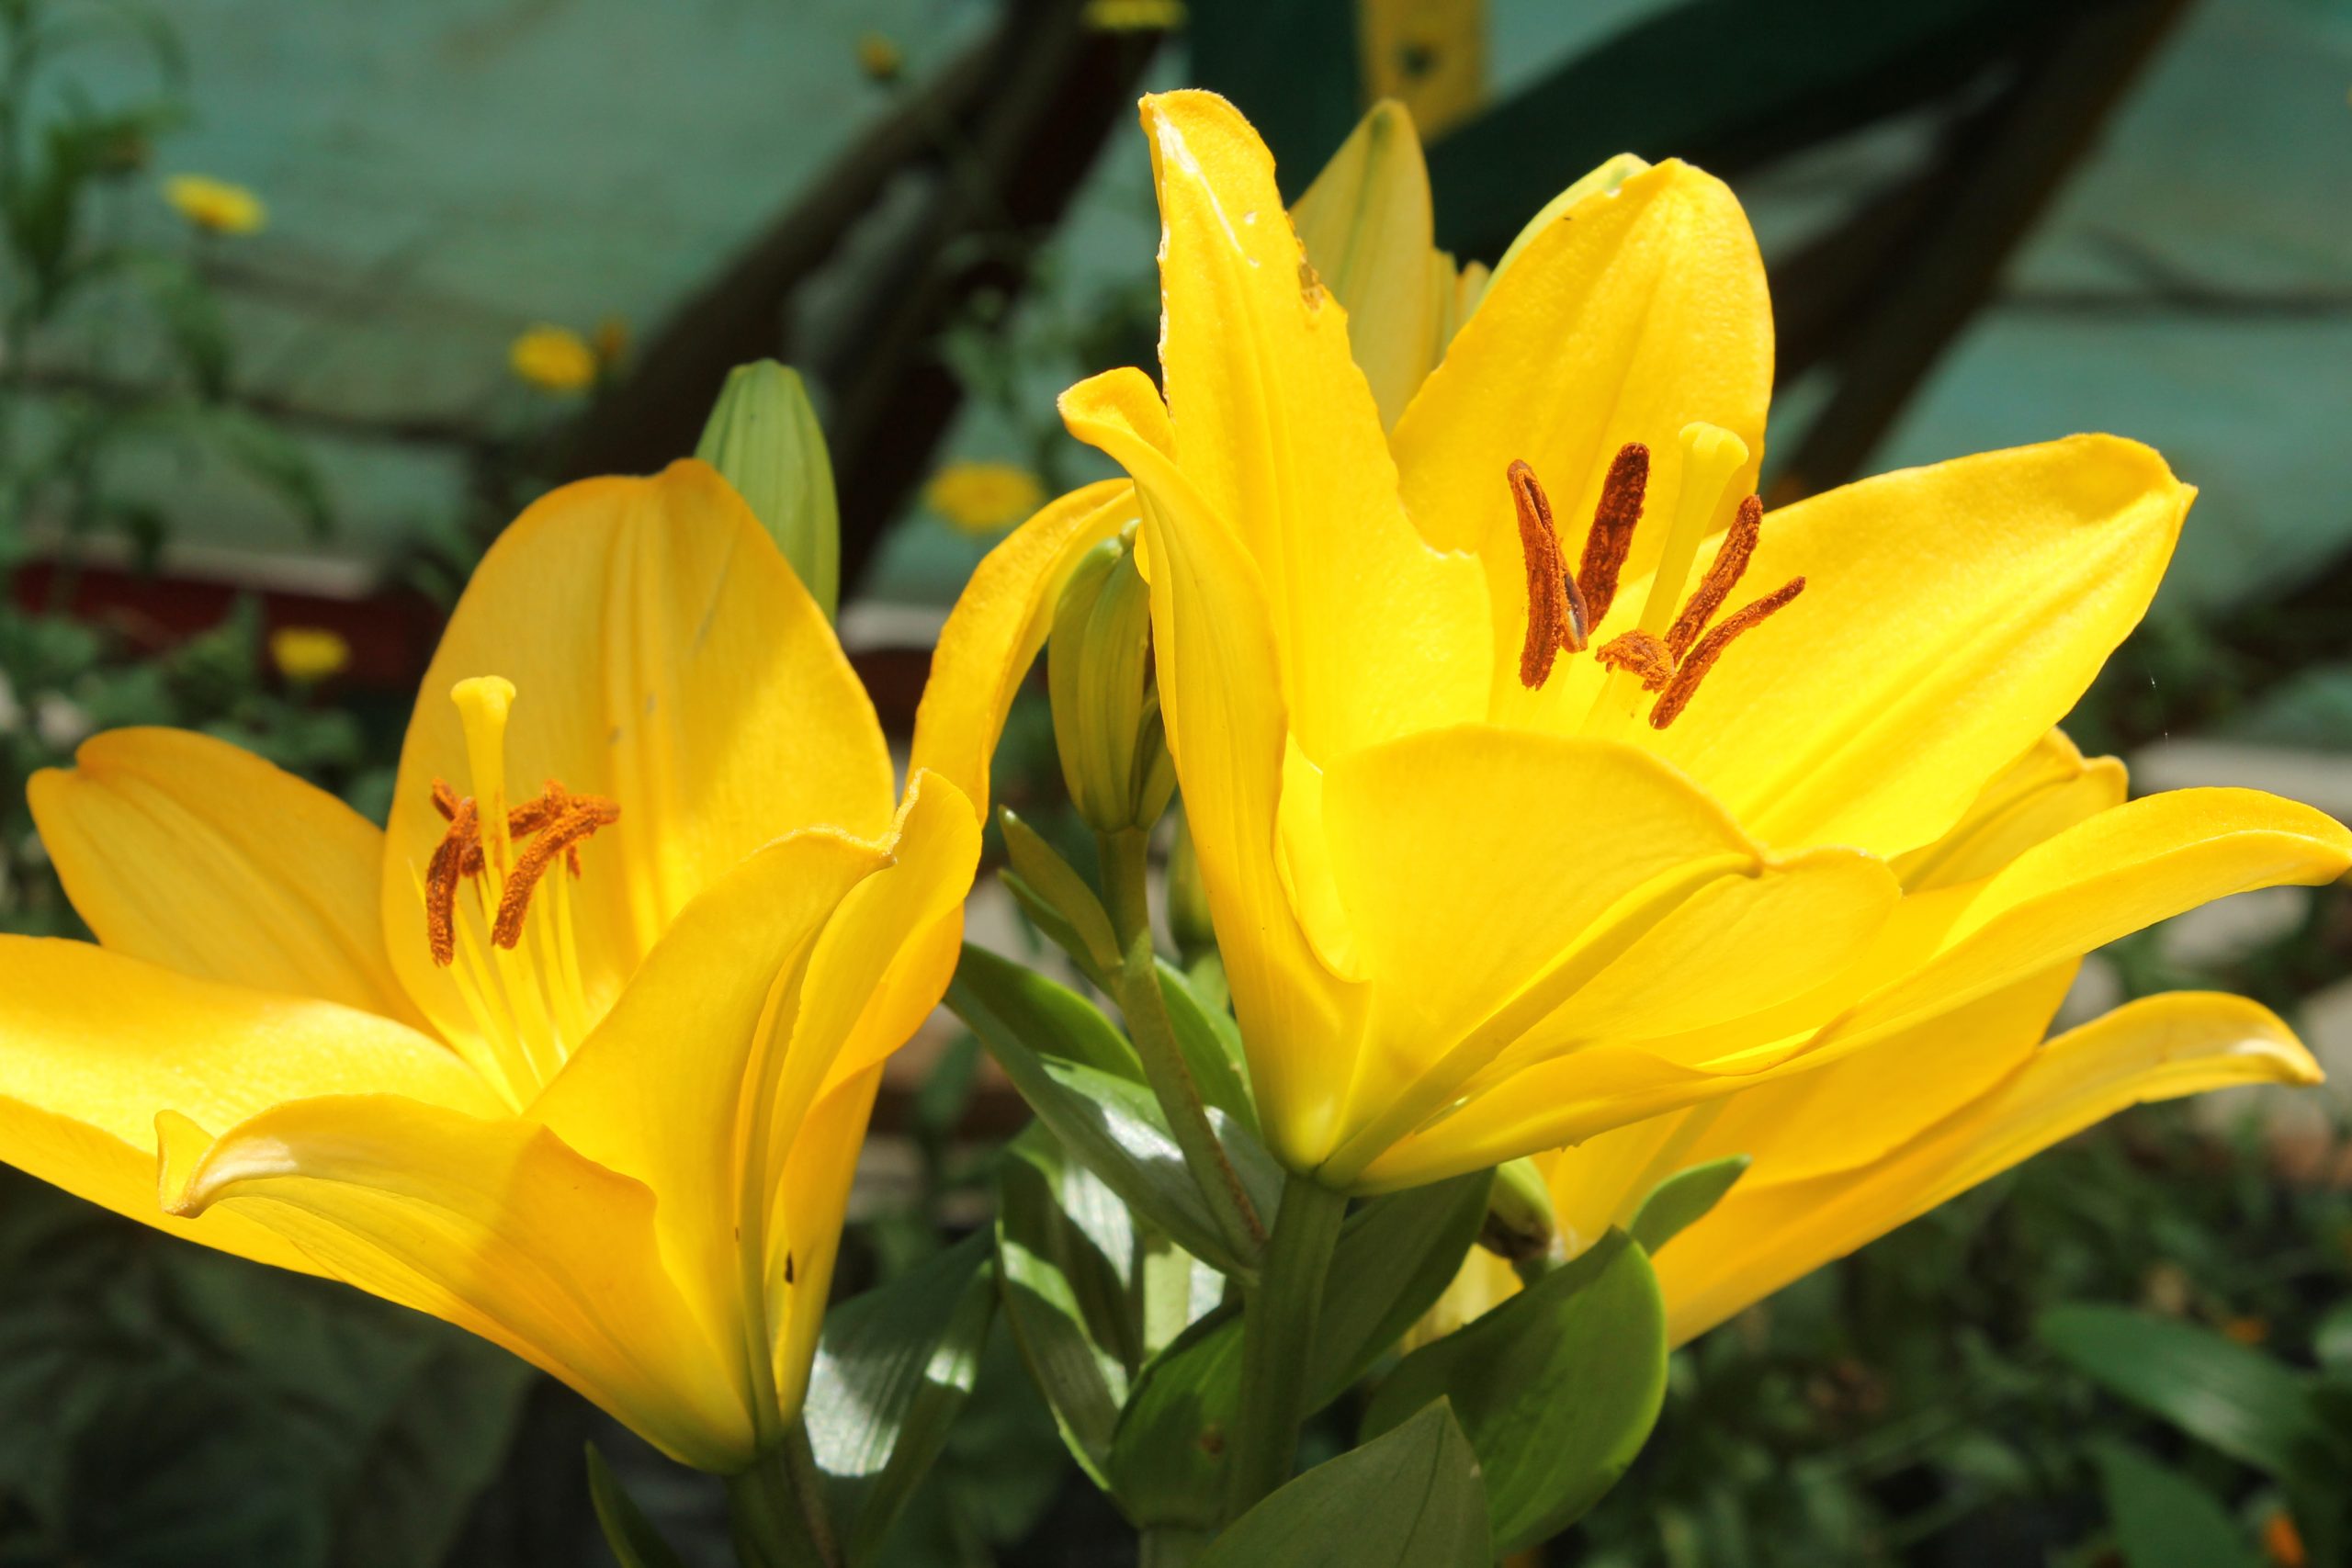 A pair of yellow flowers